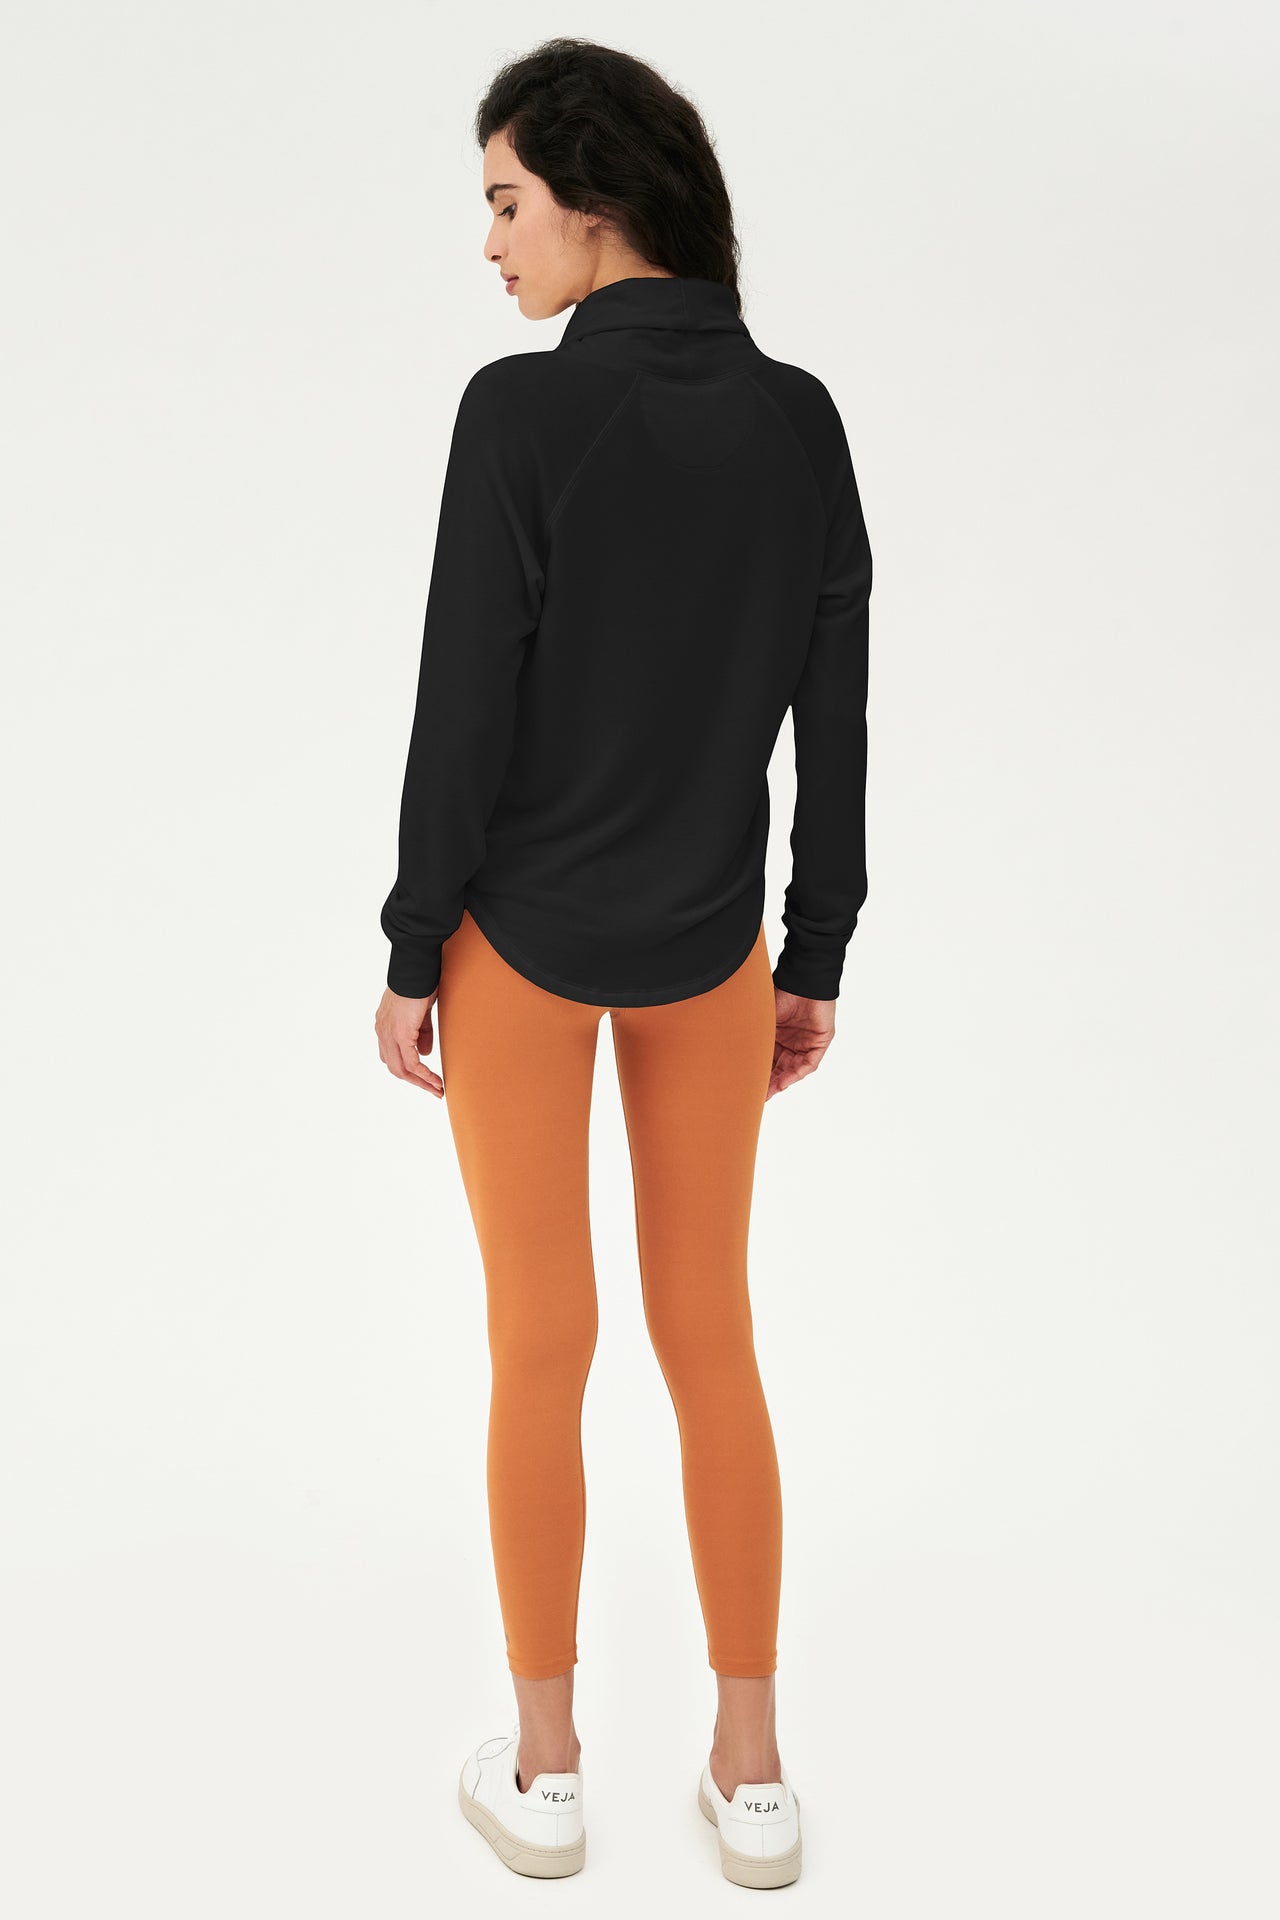 Full back shot of woman with dark wavy hair, wearing black sweatshirt with black cowl neck collar and wearing orange leggings  and white shoes